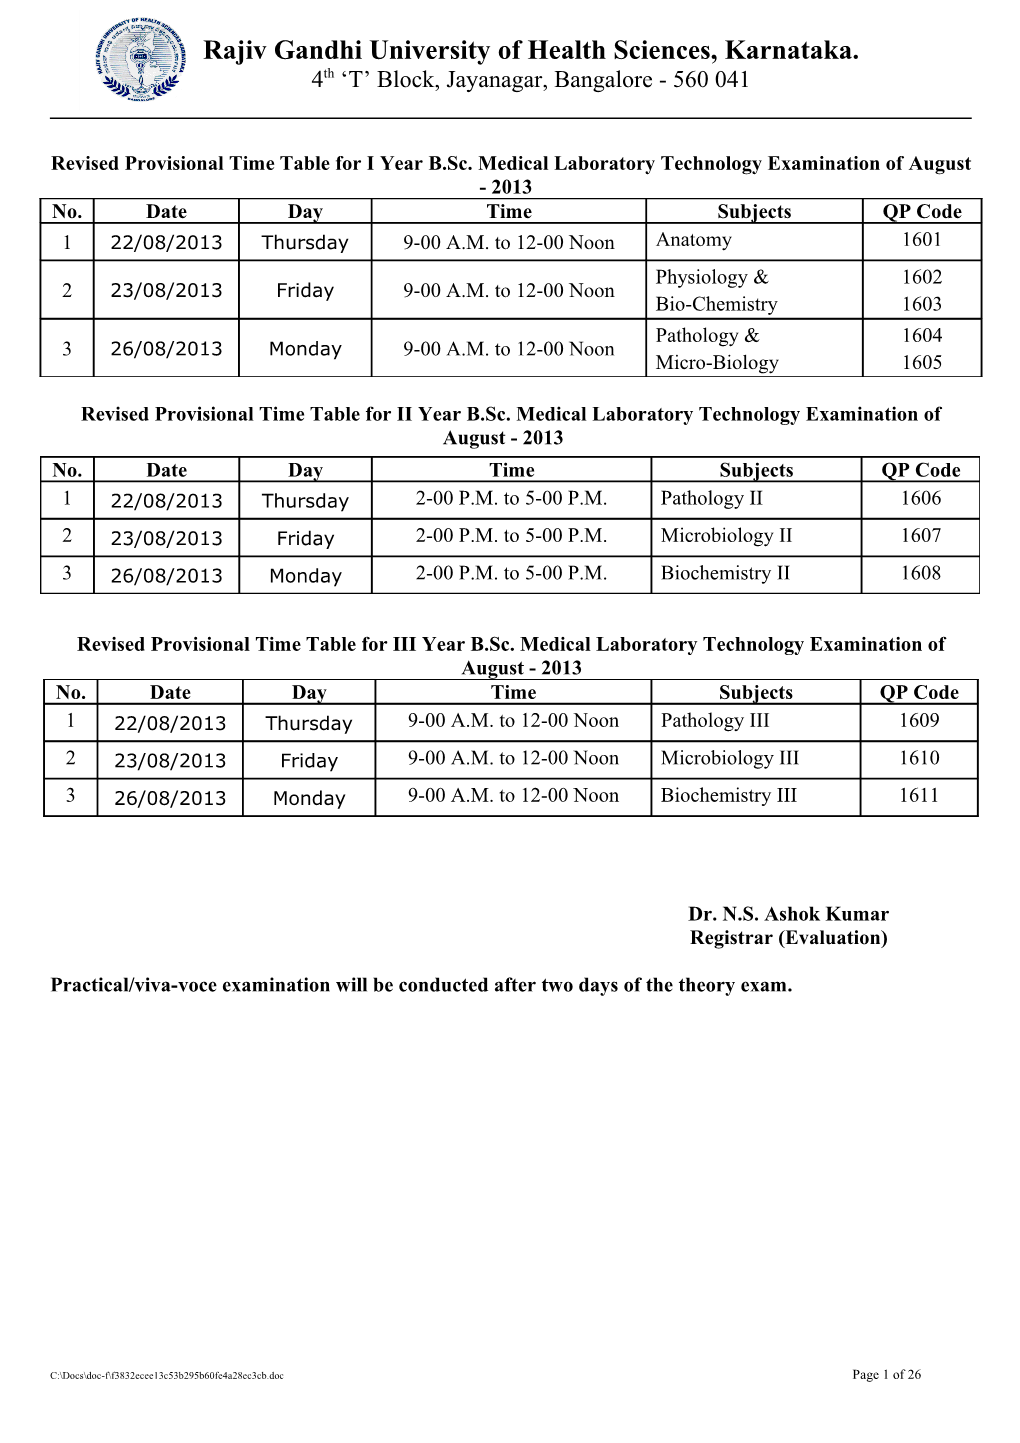 Revised Provisional Time Table for I Year B.Sc. Medical Laboratory Technology Examination